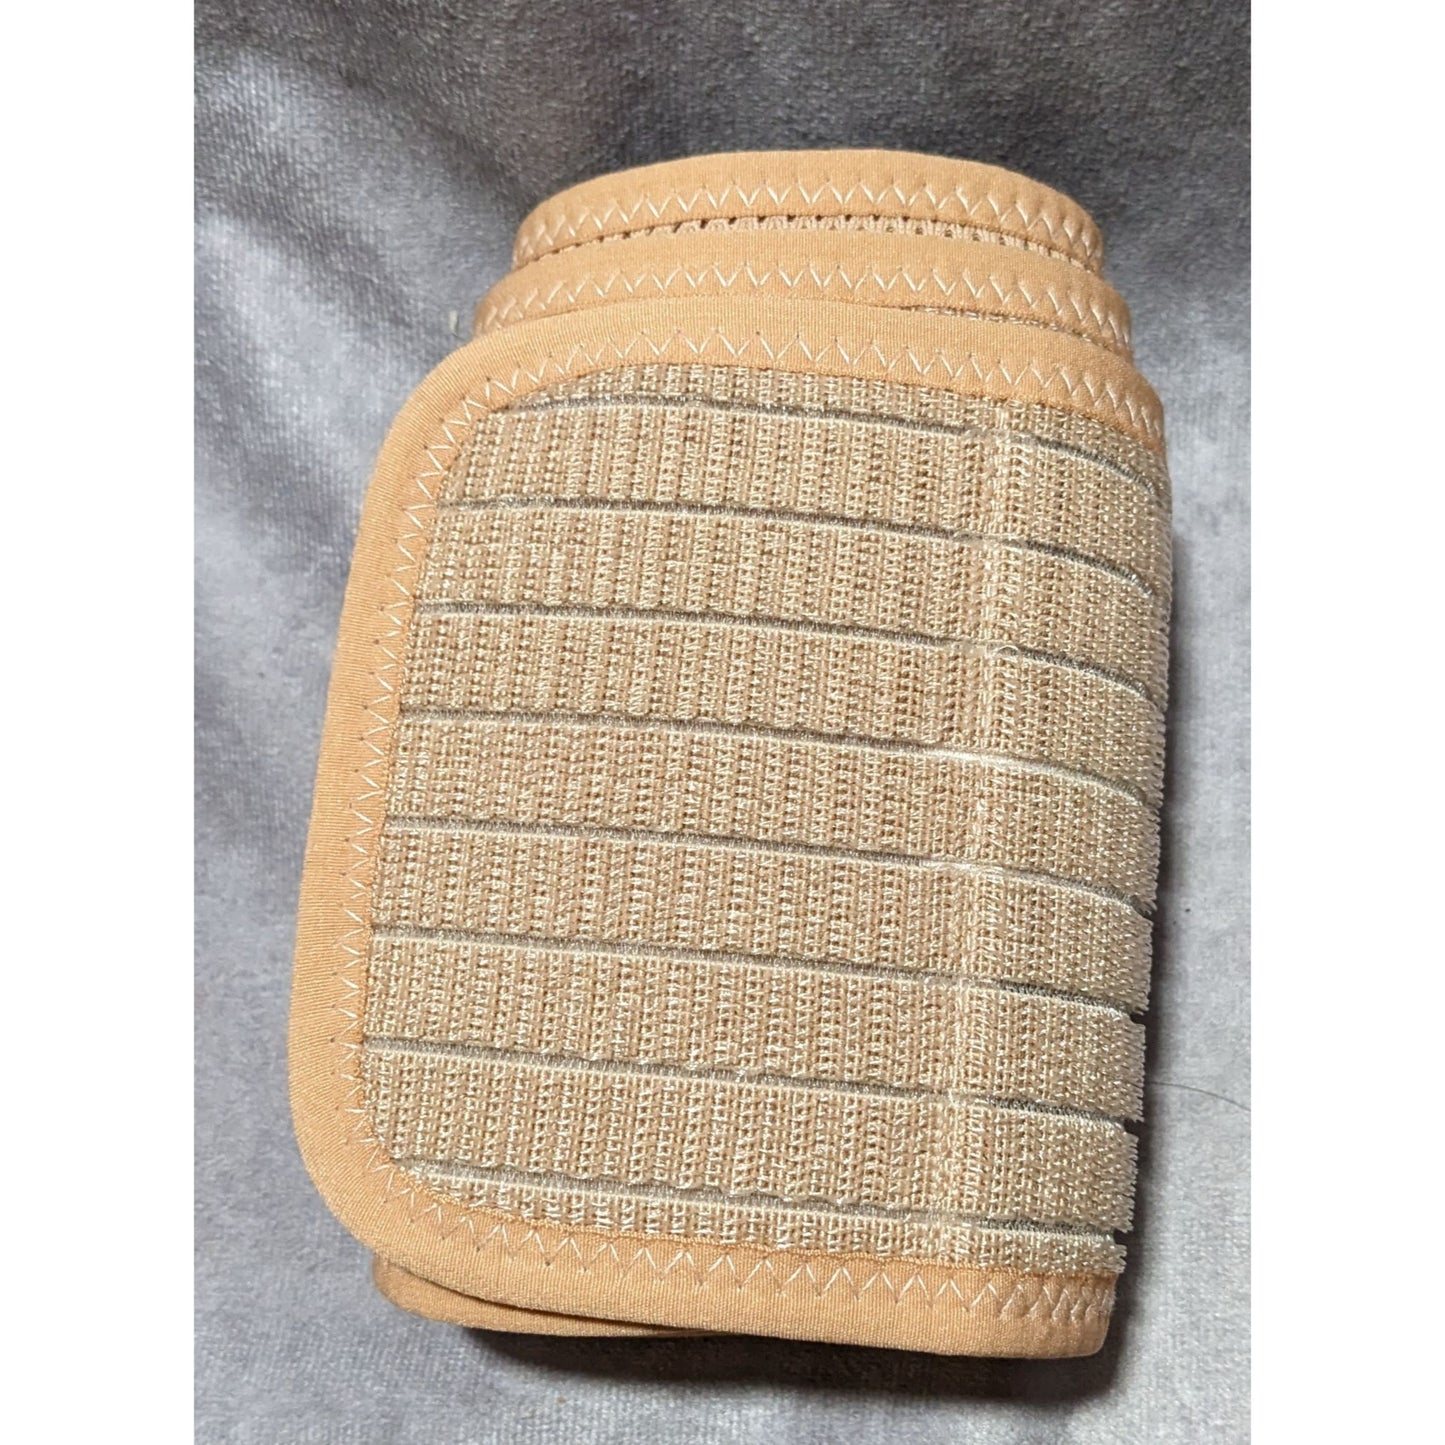 AZMed Maternity Belly Band